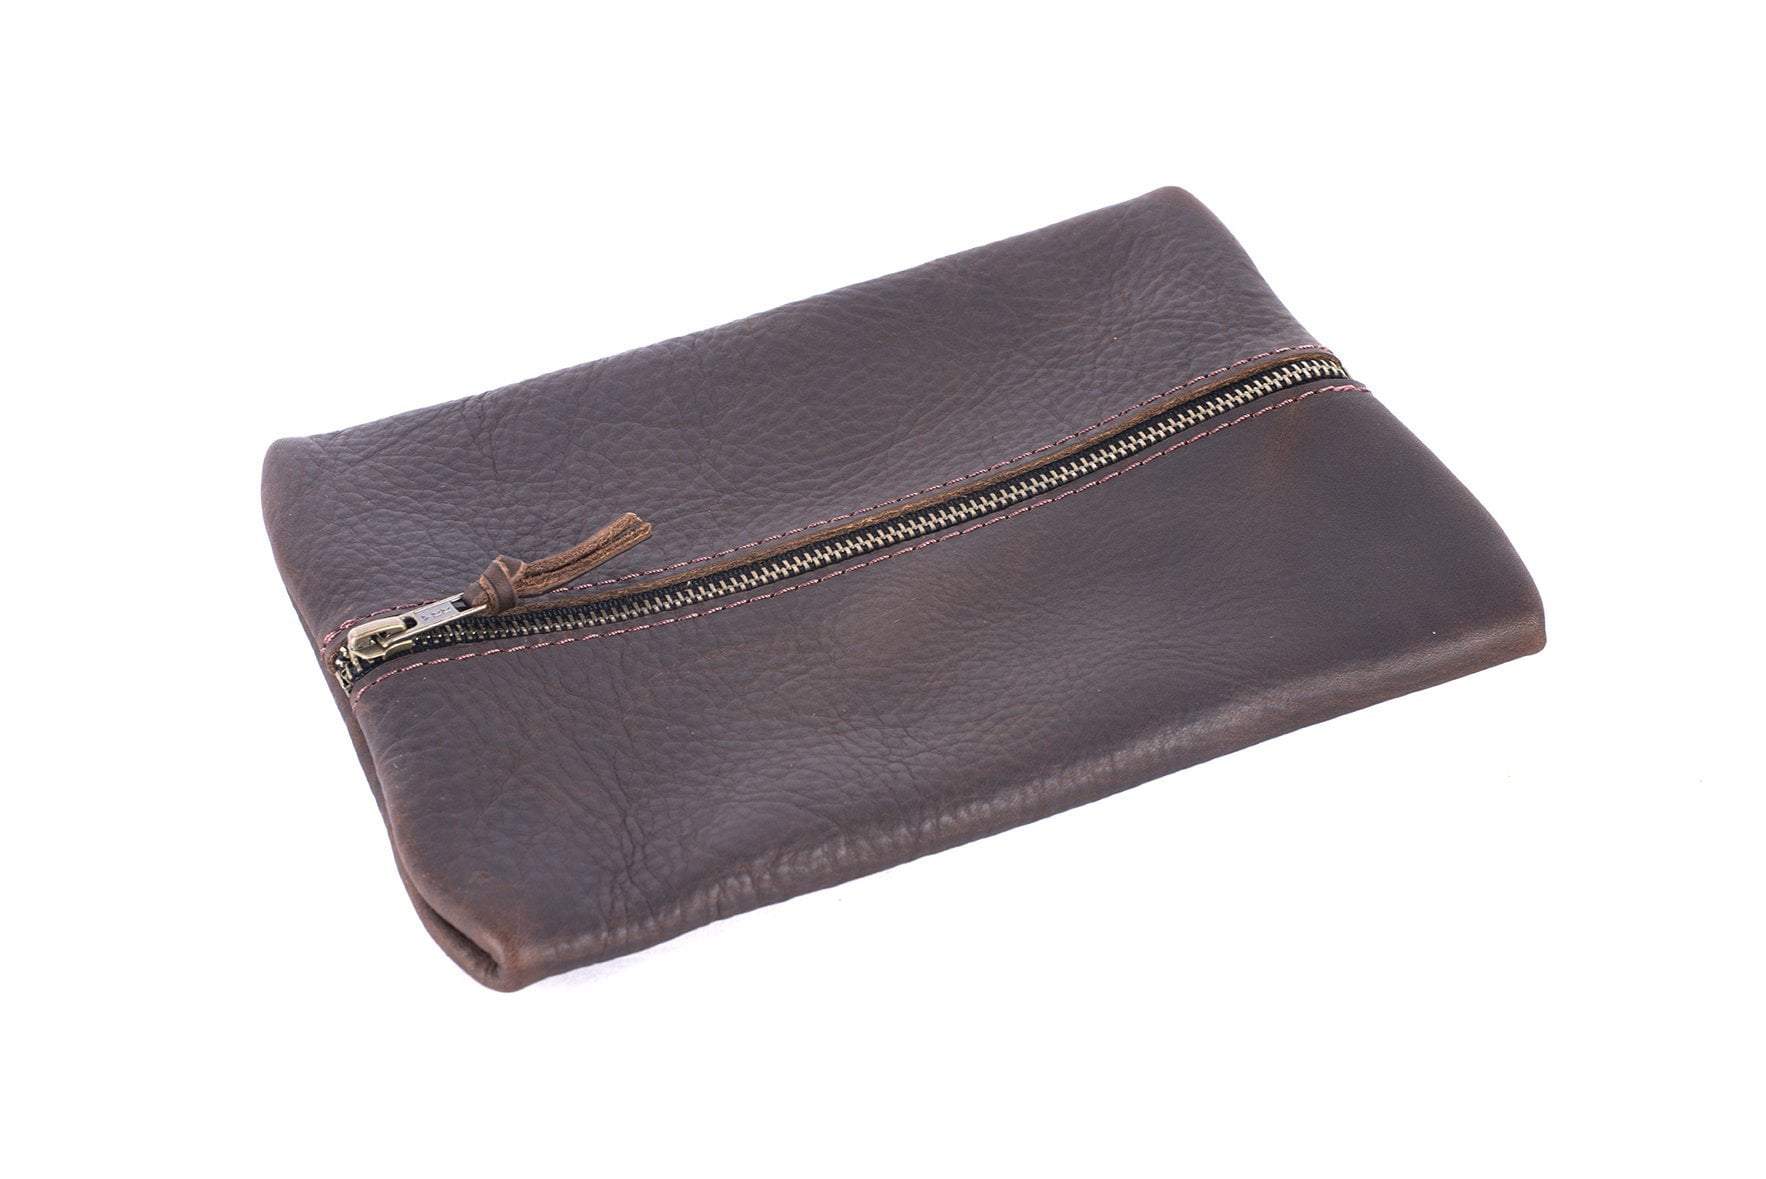 Flat Pouch - Brown leather pouch